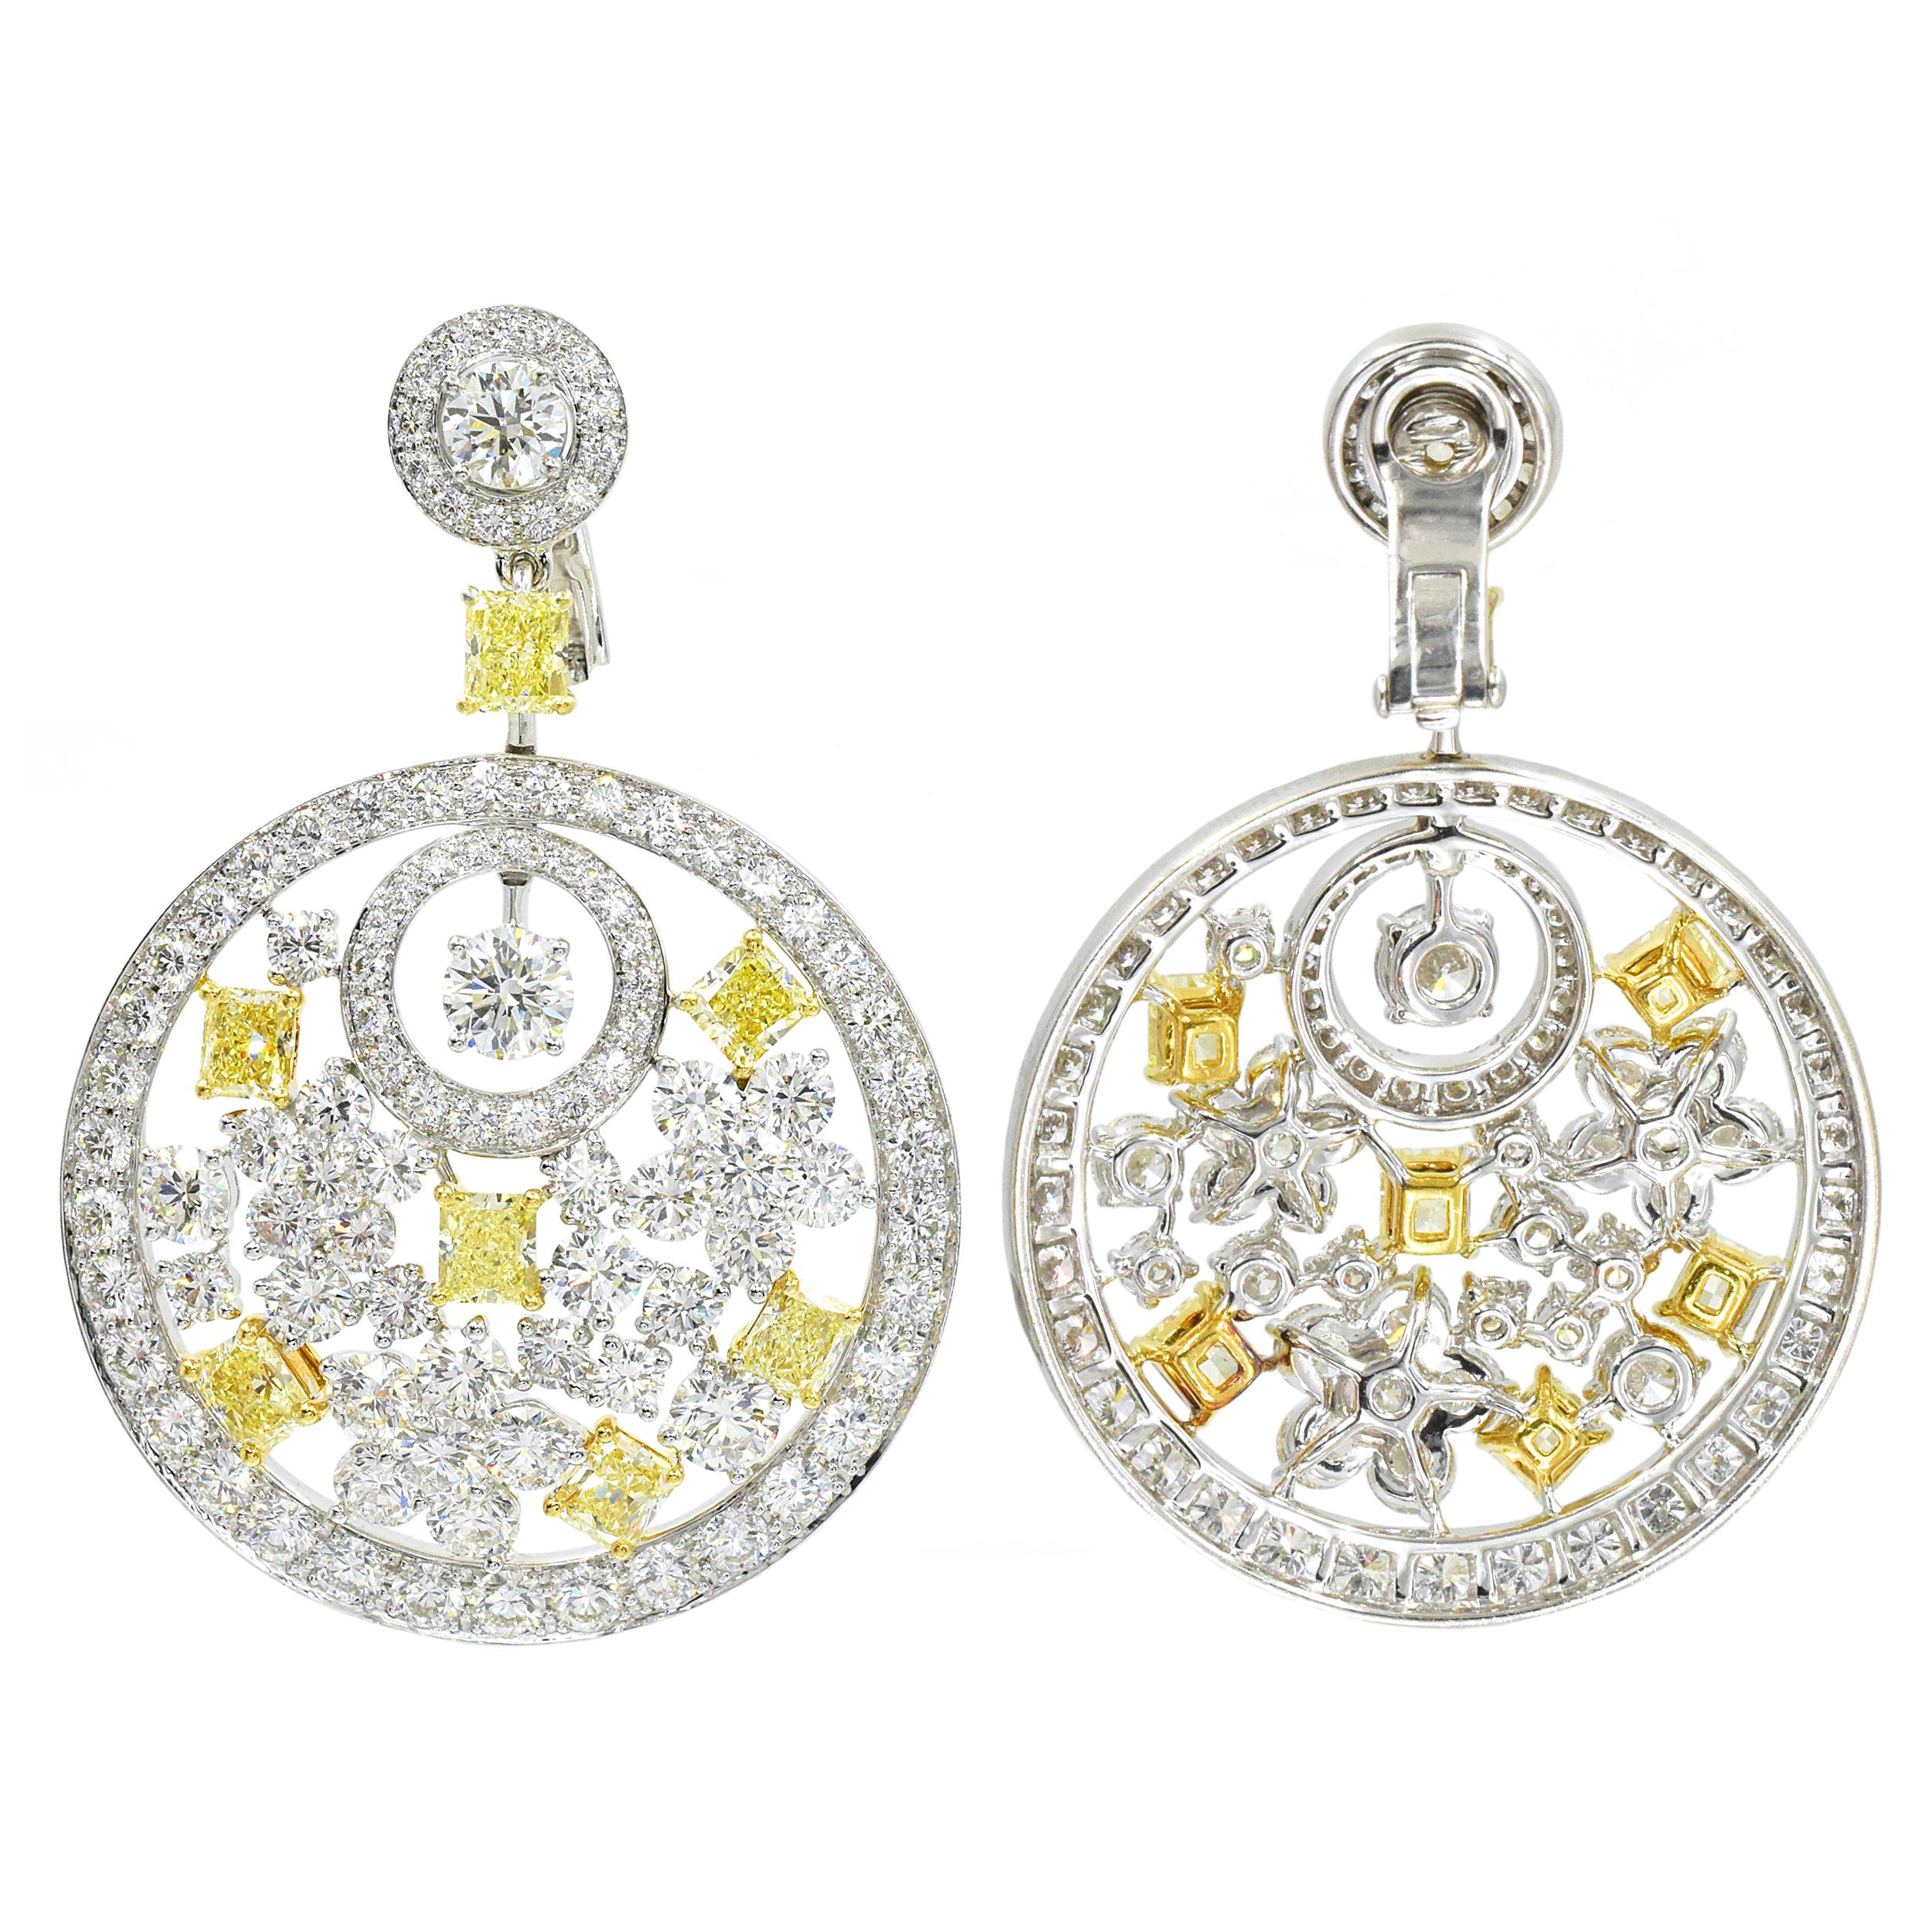 Graff Pair of  Diamond and Fancy Colored Diamond Pendant- Ear-clips This pair of earrings is topped by 2 round diamonds encircled by round diamonds, joined by 2 rectangular modified brilliant yellow diamonds, suspending large round diamond-set white